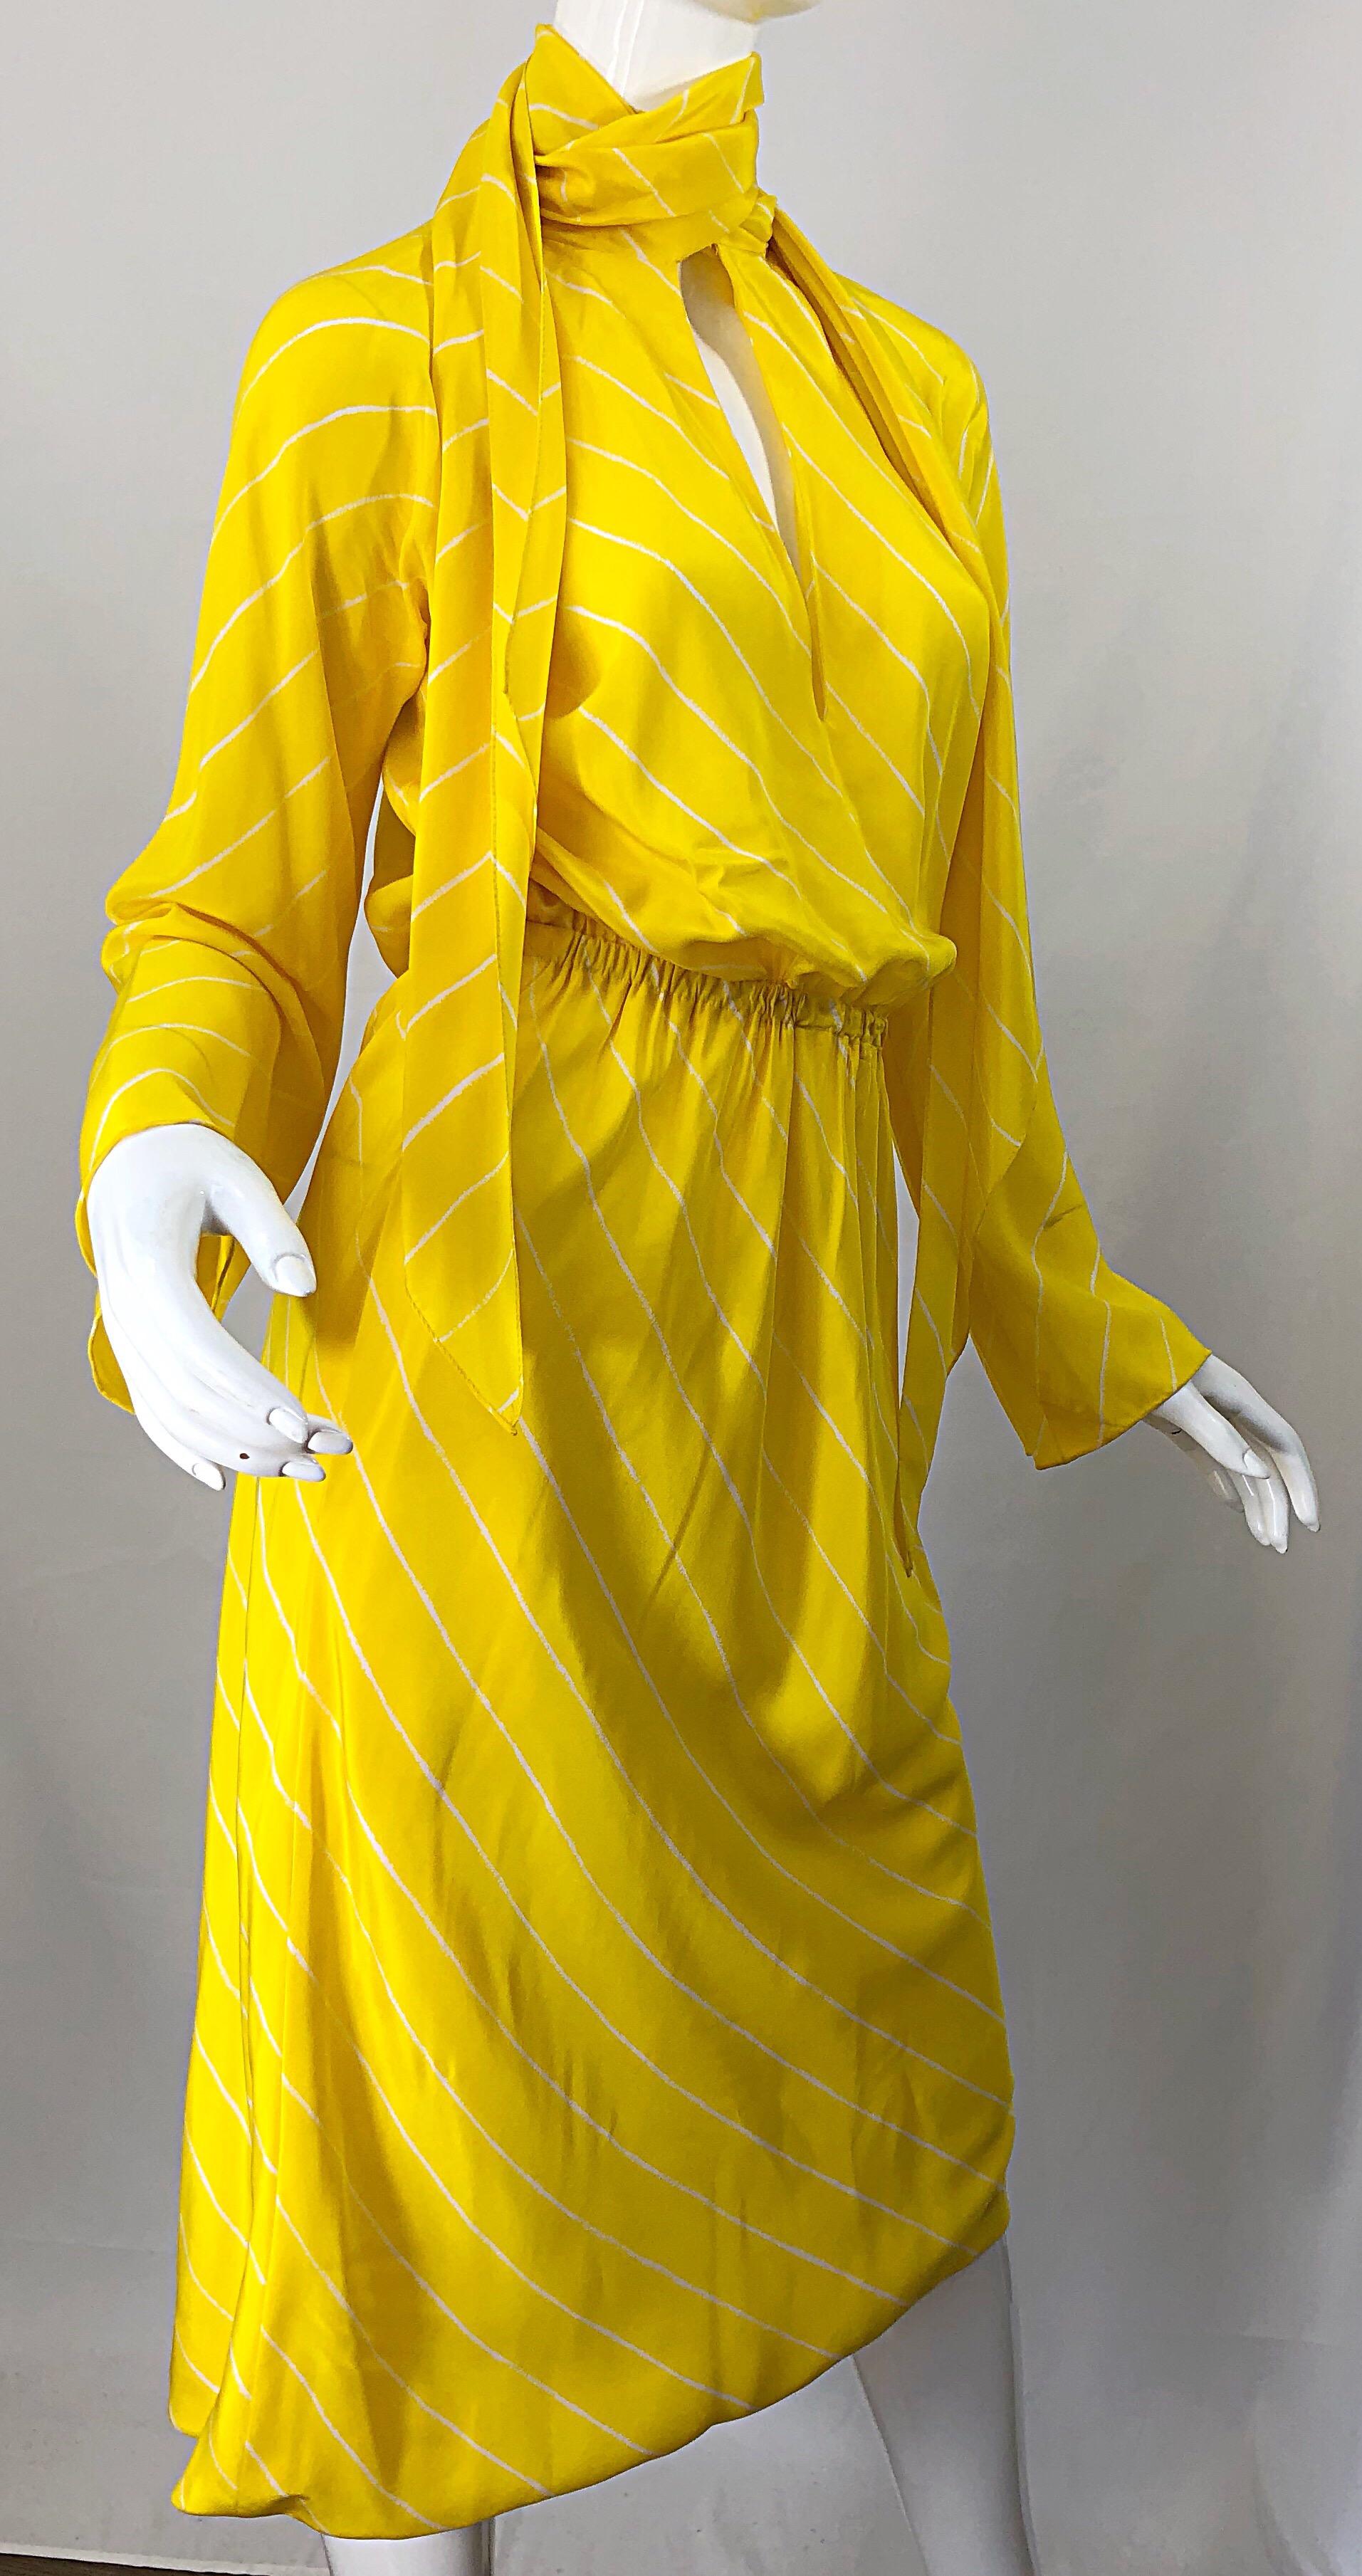 1970s Halston Canary Yellow + White Chevron Striped Bell Sleeve 70s Scarf Dress 1